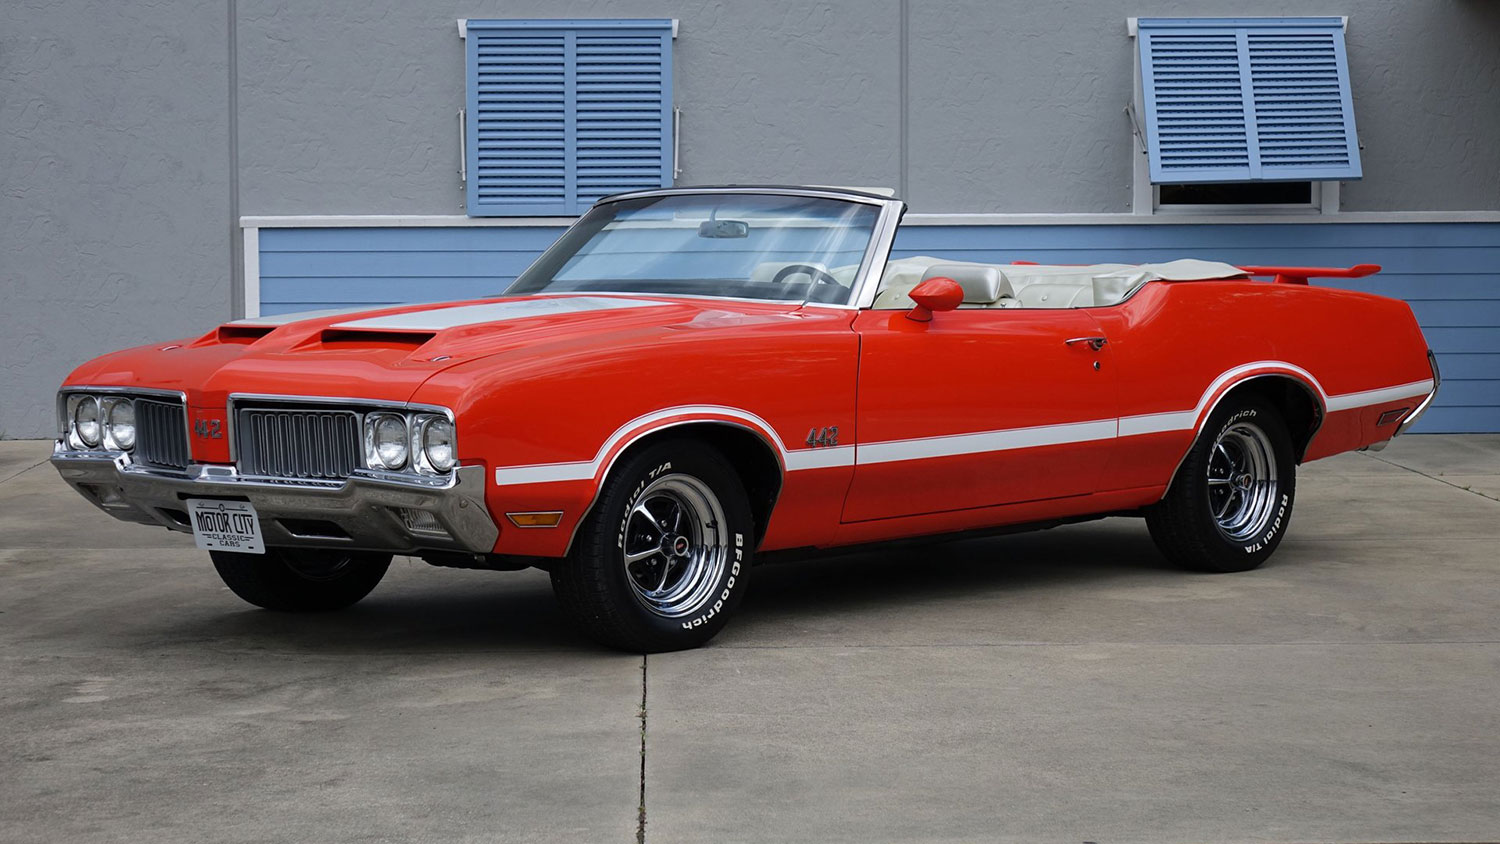 Beautifully Restored 1970 Oldsmobile 442 For Sale Video